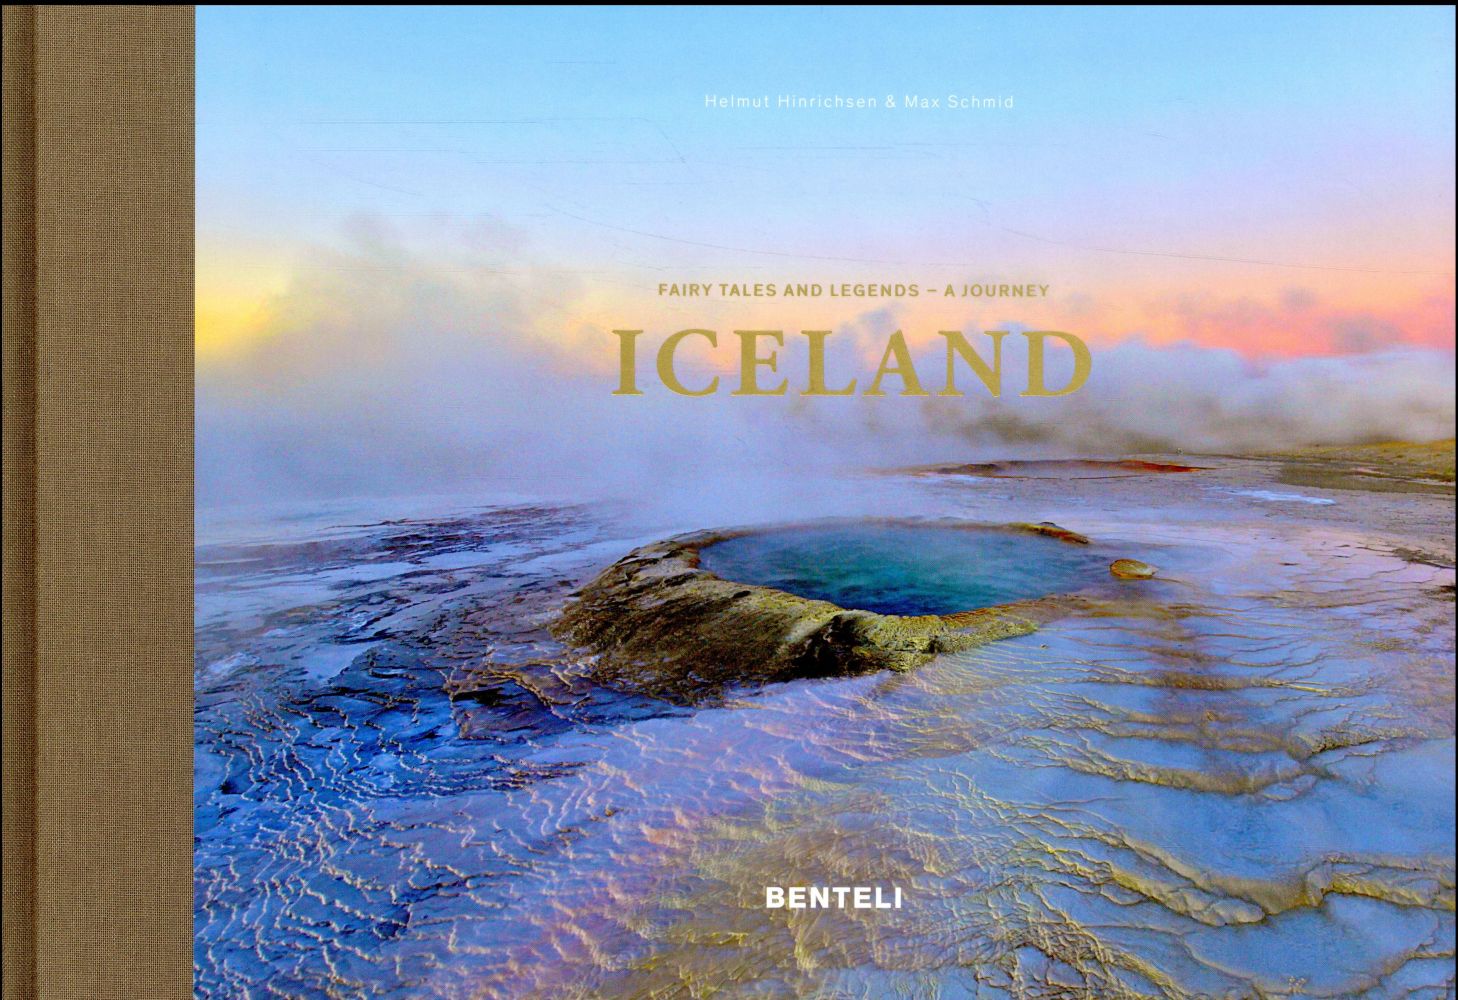 ICELAND - FAIRY TALES AND LEGENDS - A JOURNEY